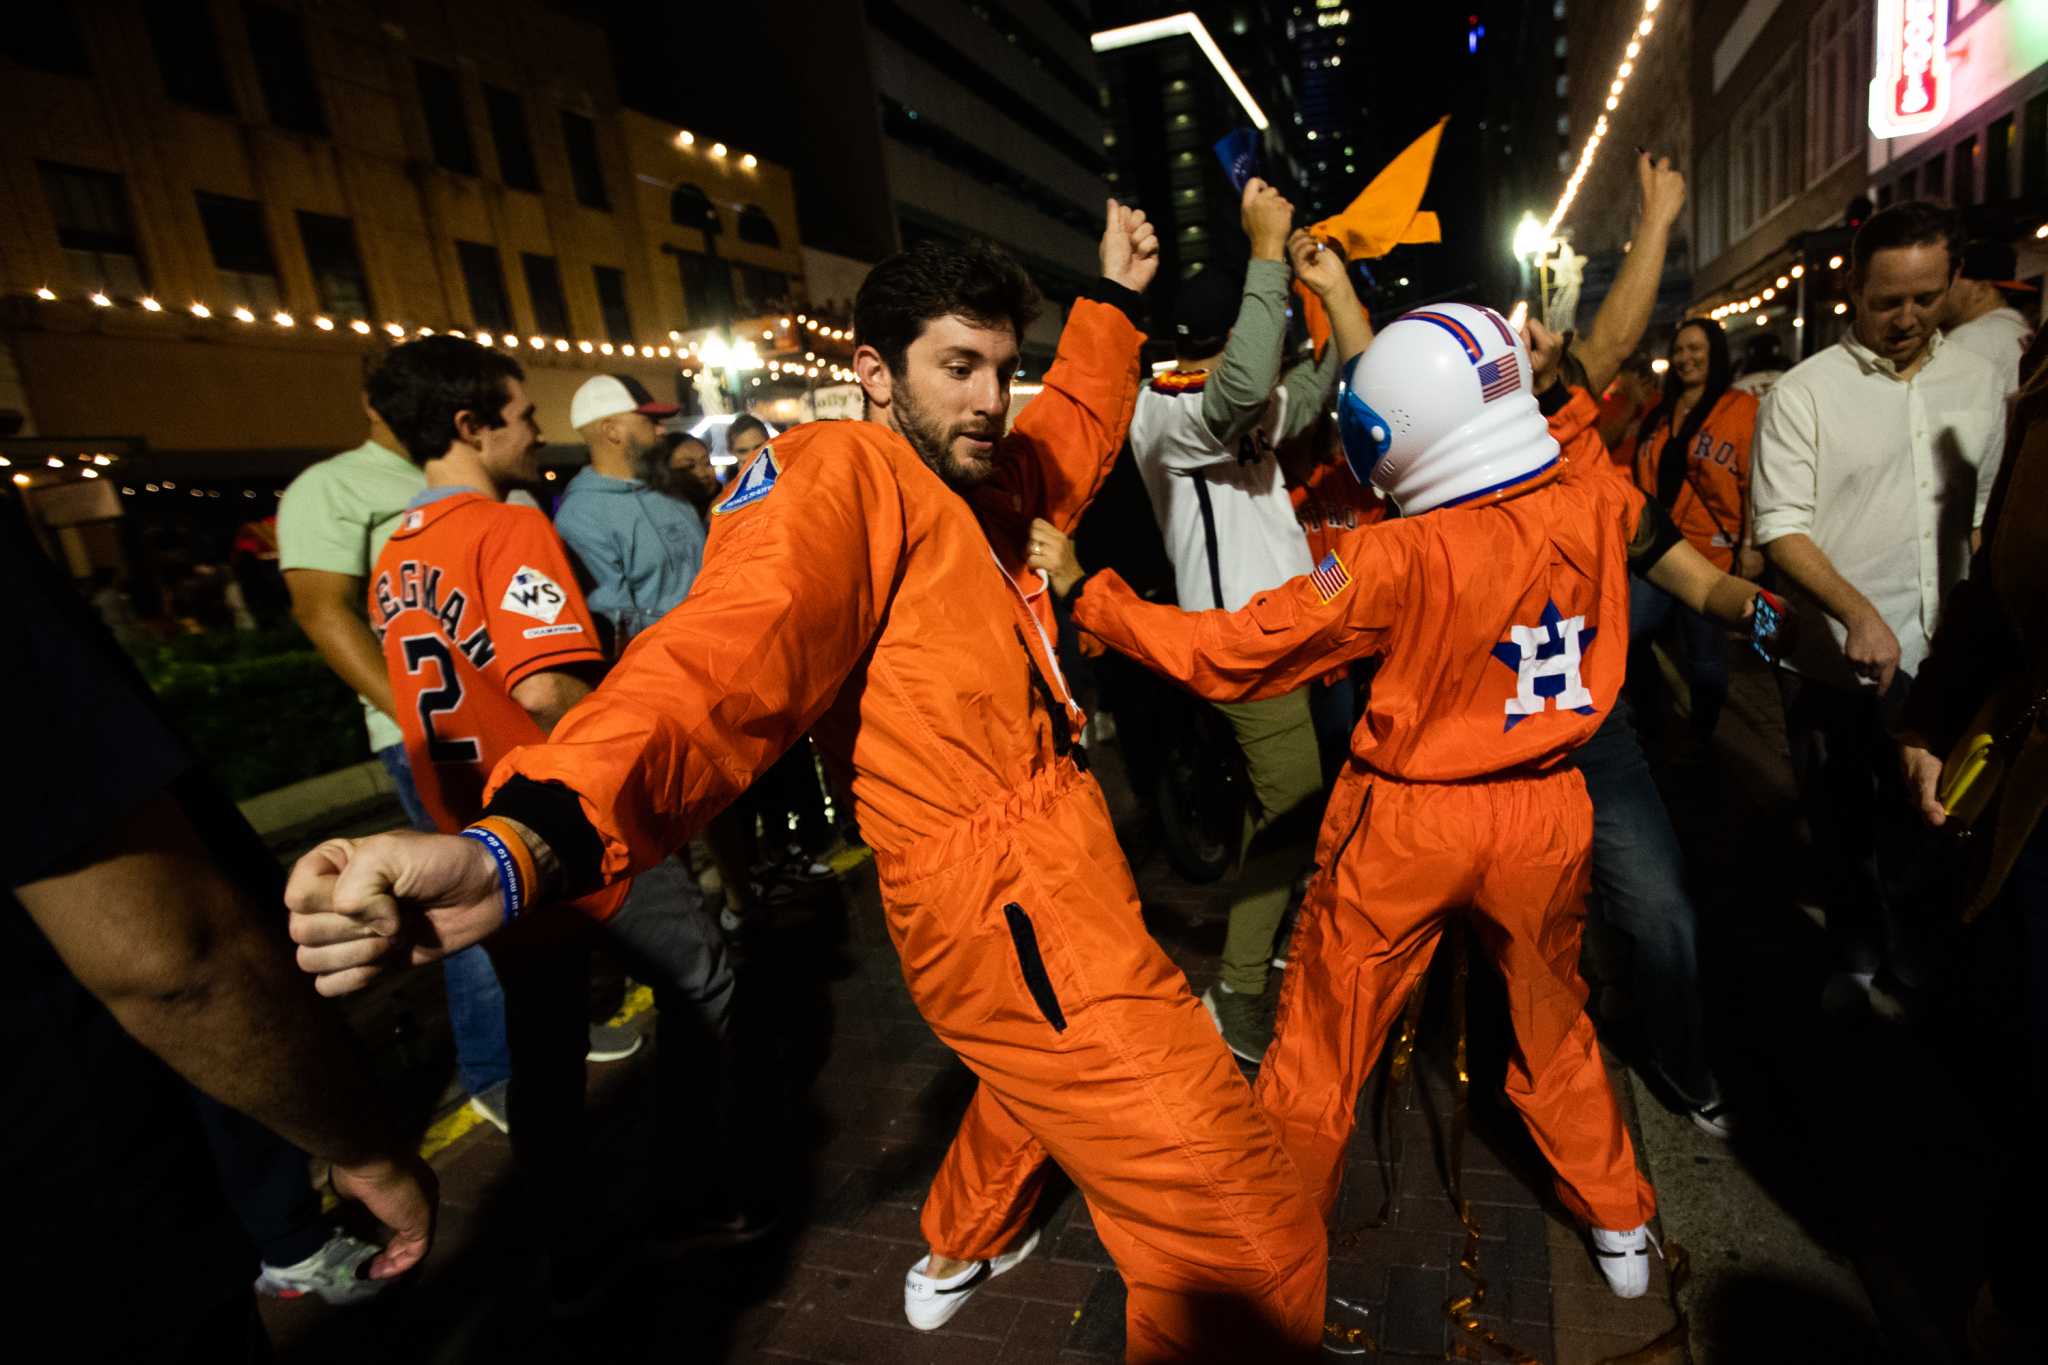 Astros fans celebrate World Series win in the streets of Houston